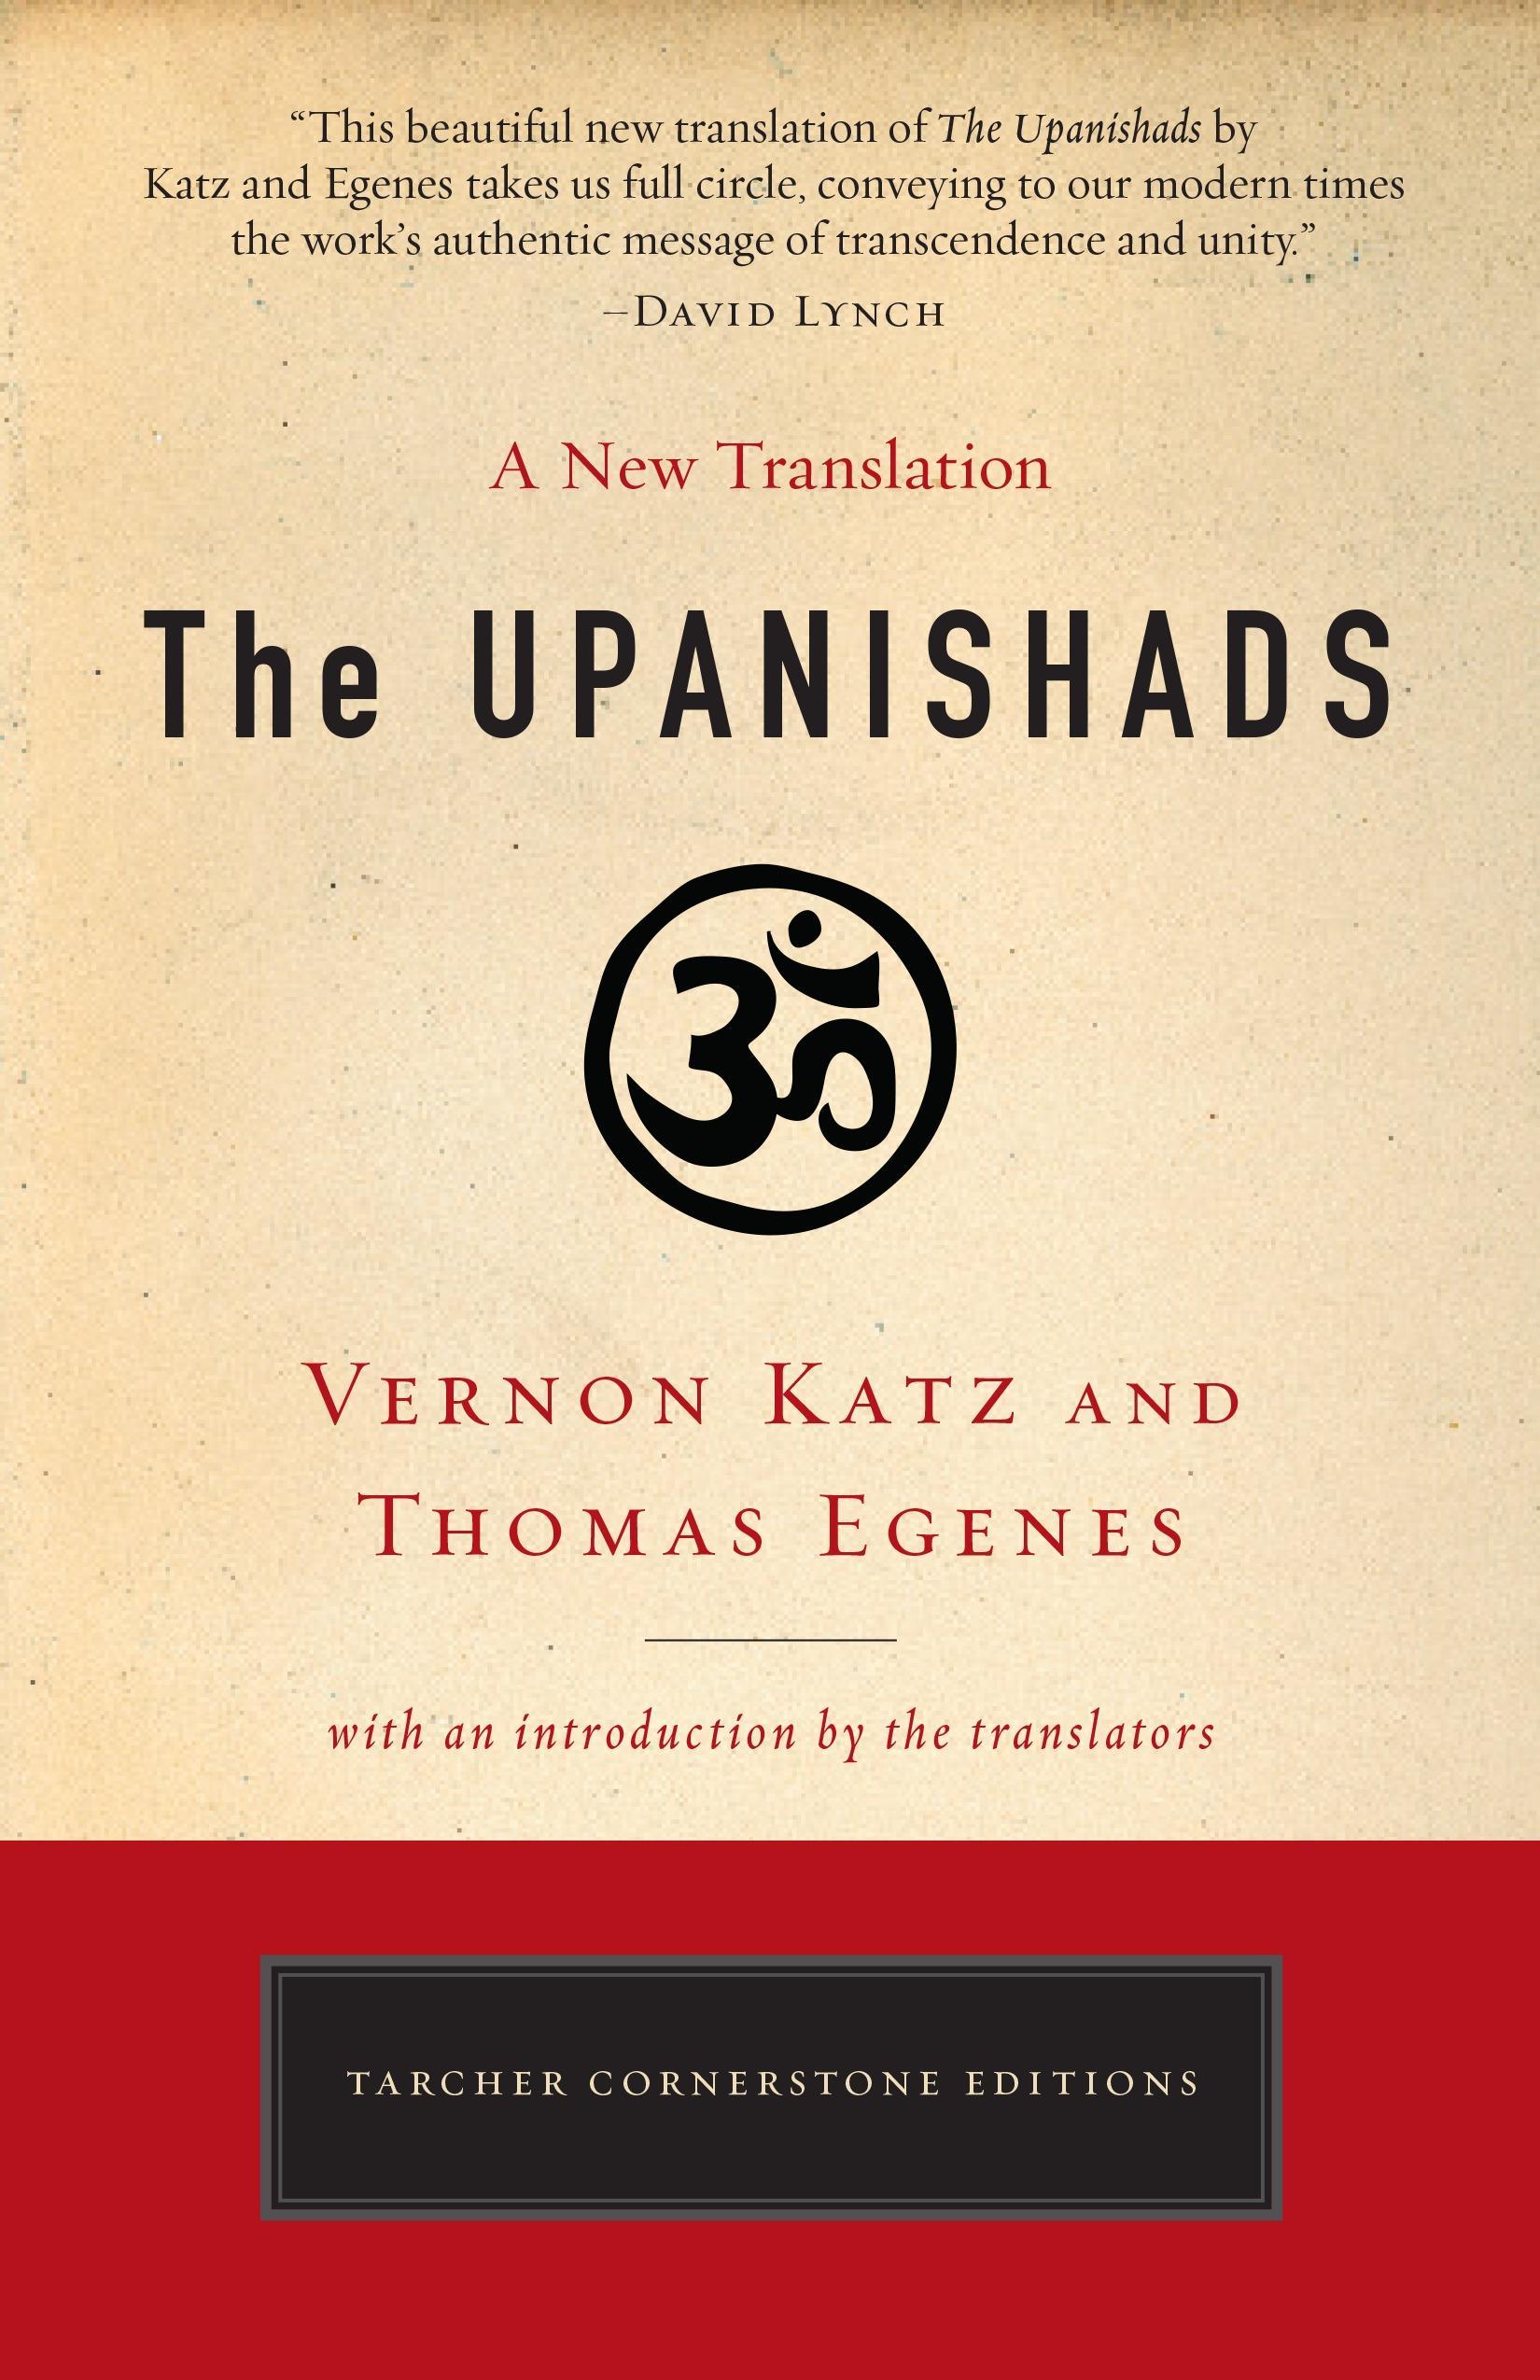 The Upanishads: A New Translation by Vernon Katz and Thomas Egenes - Vernon Katz|Thomas Egenes